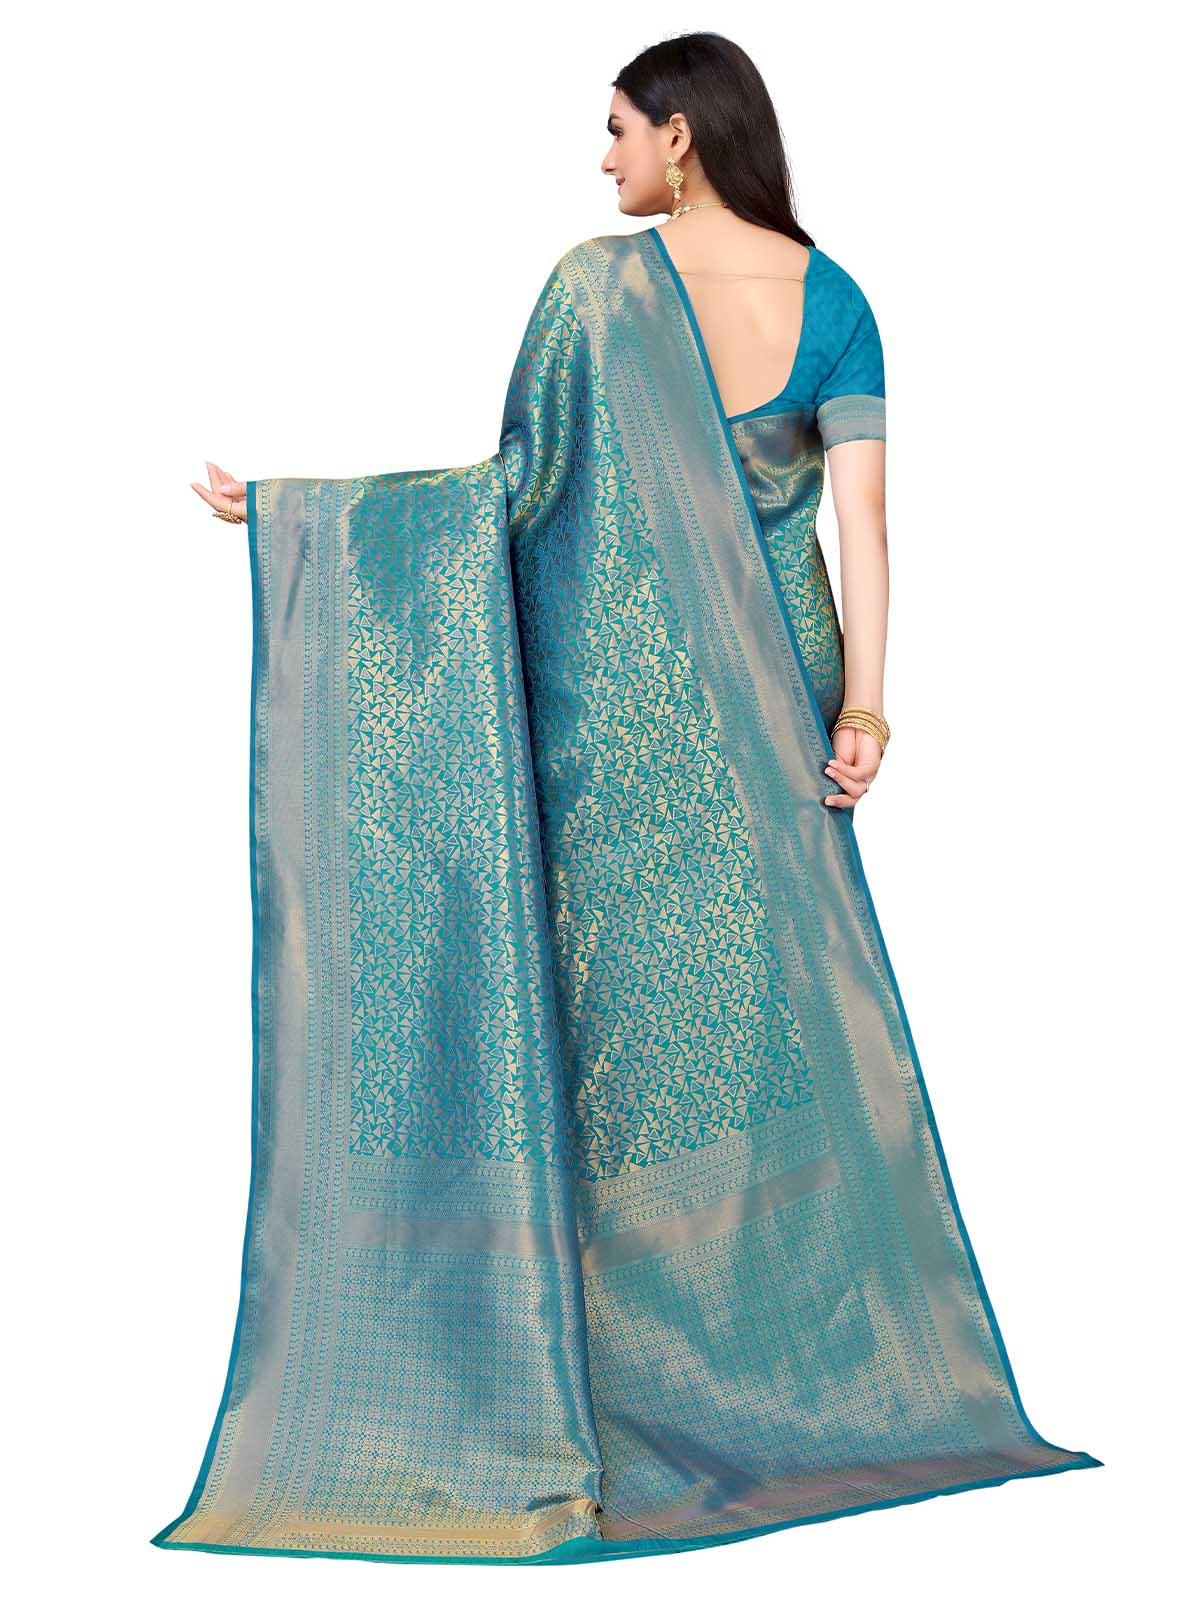 Women's Teal Silk Blend Woven Saree With Blouse - Odette